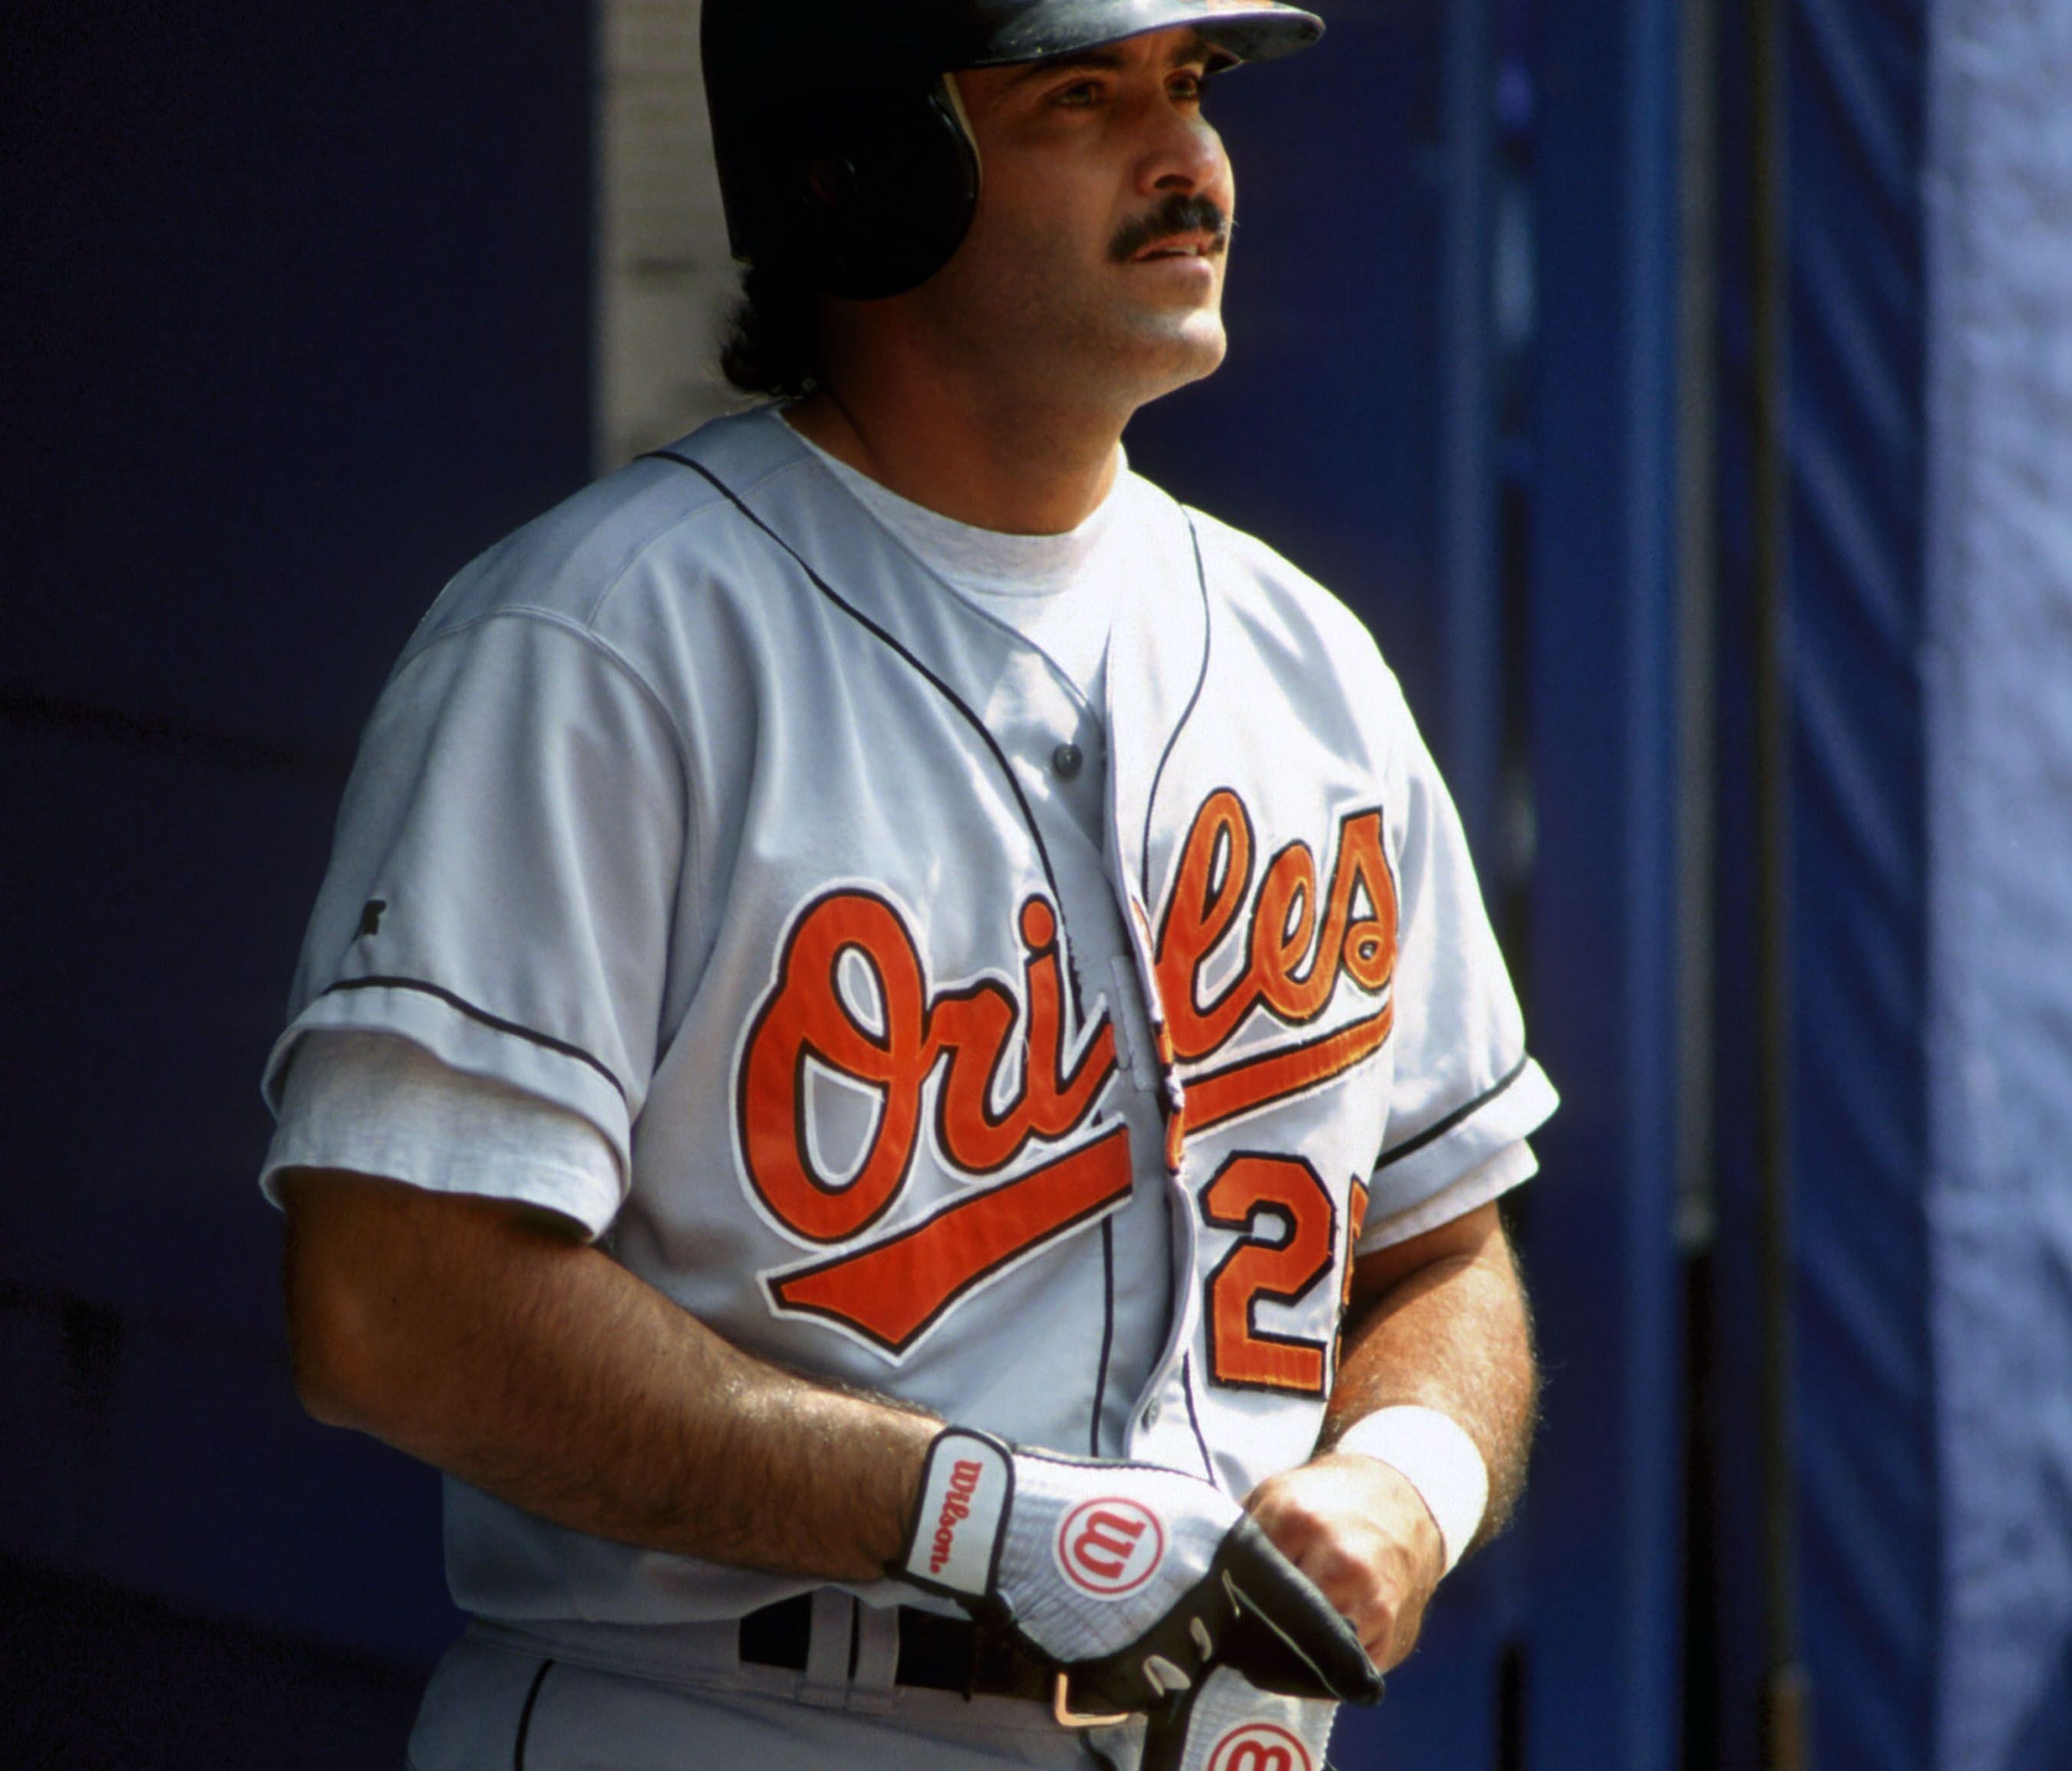 Before his 20-year major league career, Rafael Palmeiro played for the Iowa Cubs in Des Moines. He hit .299 with 14 doubles and 11 home runs in 57 games for the I-Cubs in 1987.